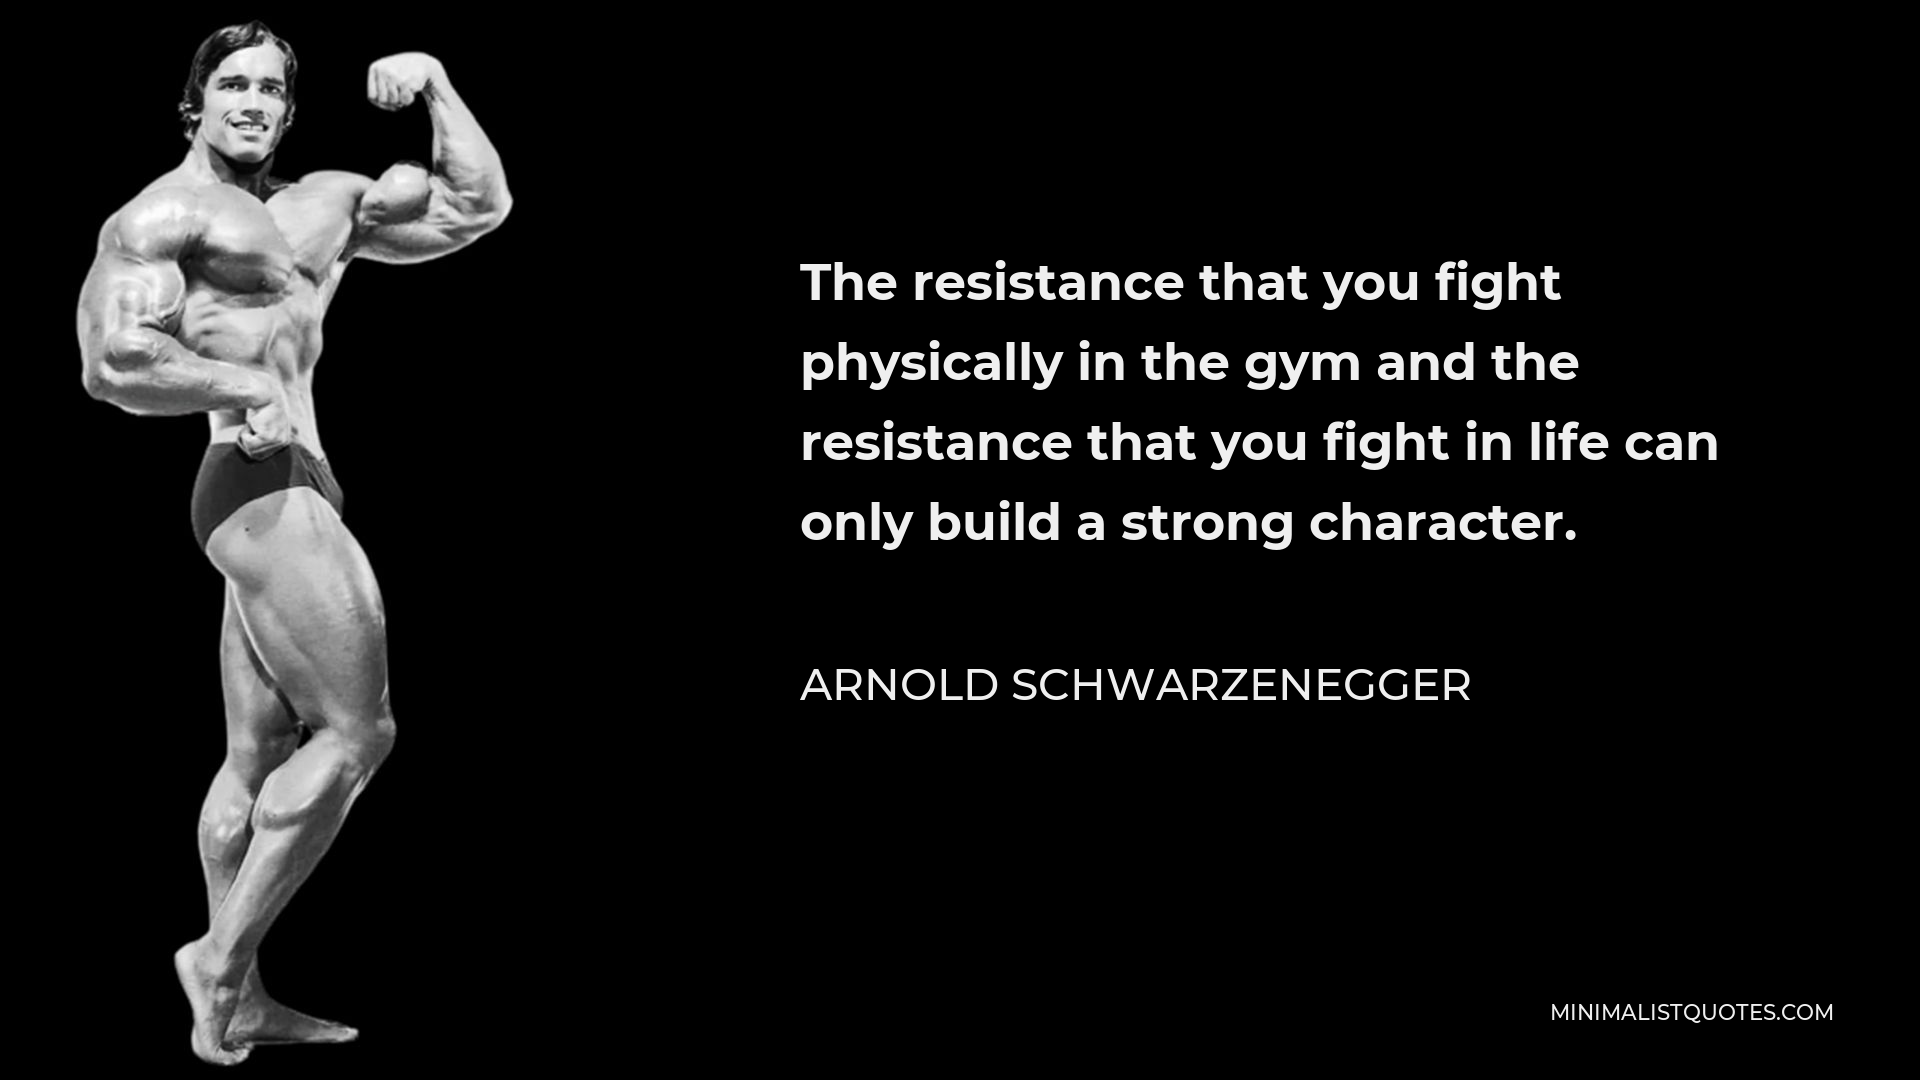 Arnold Schwarzenegger Quote - The resistance that you fight physically in the gym and the resistance that you fight in life can only build a strong character.